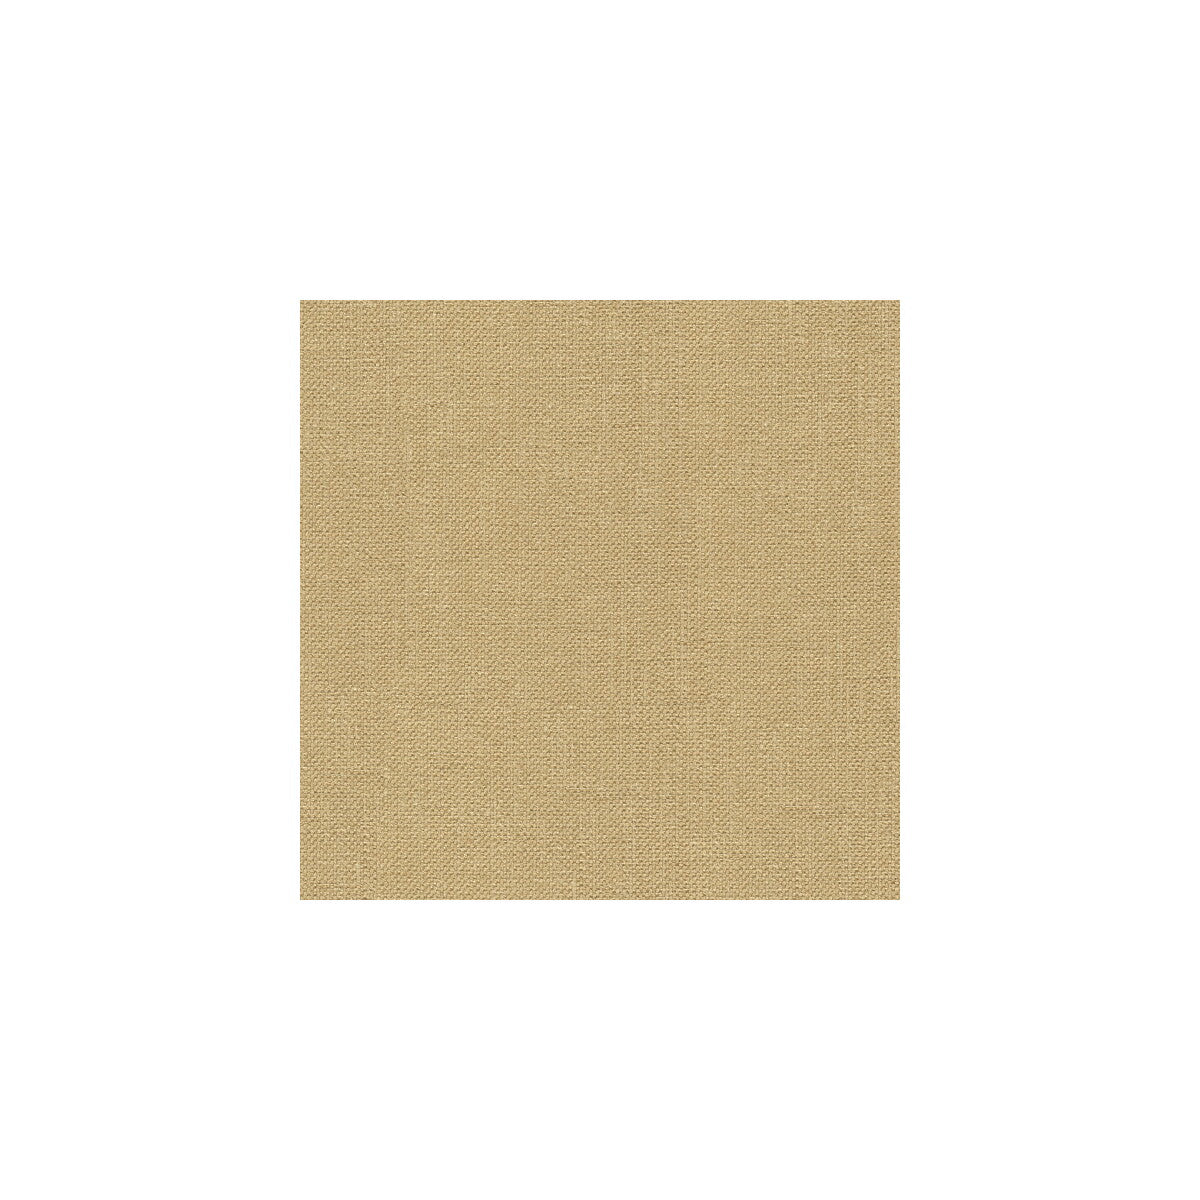 Kravet Basics fabric in 33120-616 color - pattern 33120.616.0 - by Kravet Basics in the Perfect Plains collection